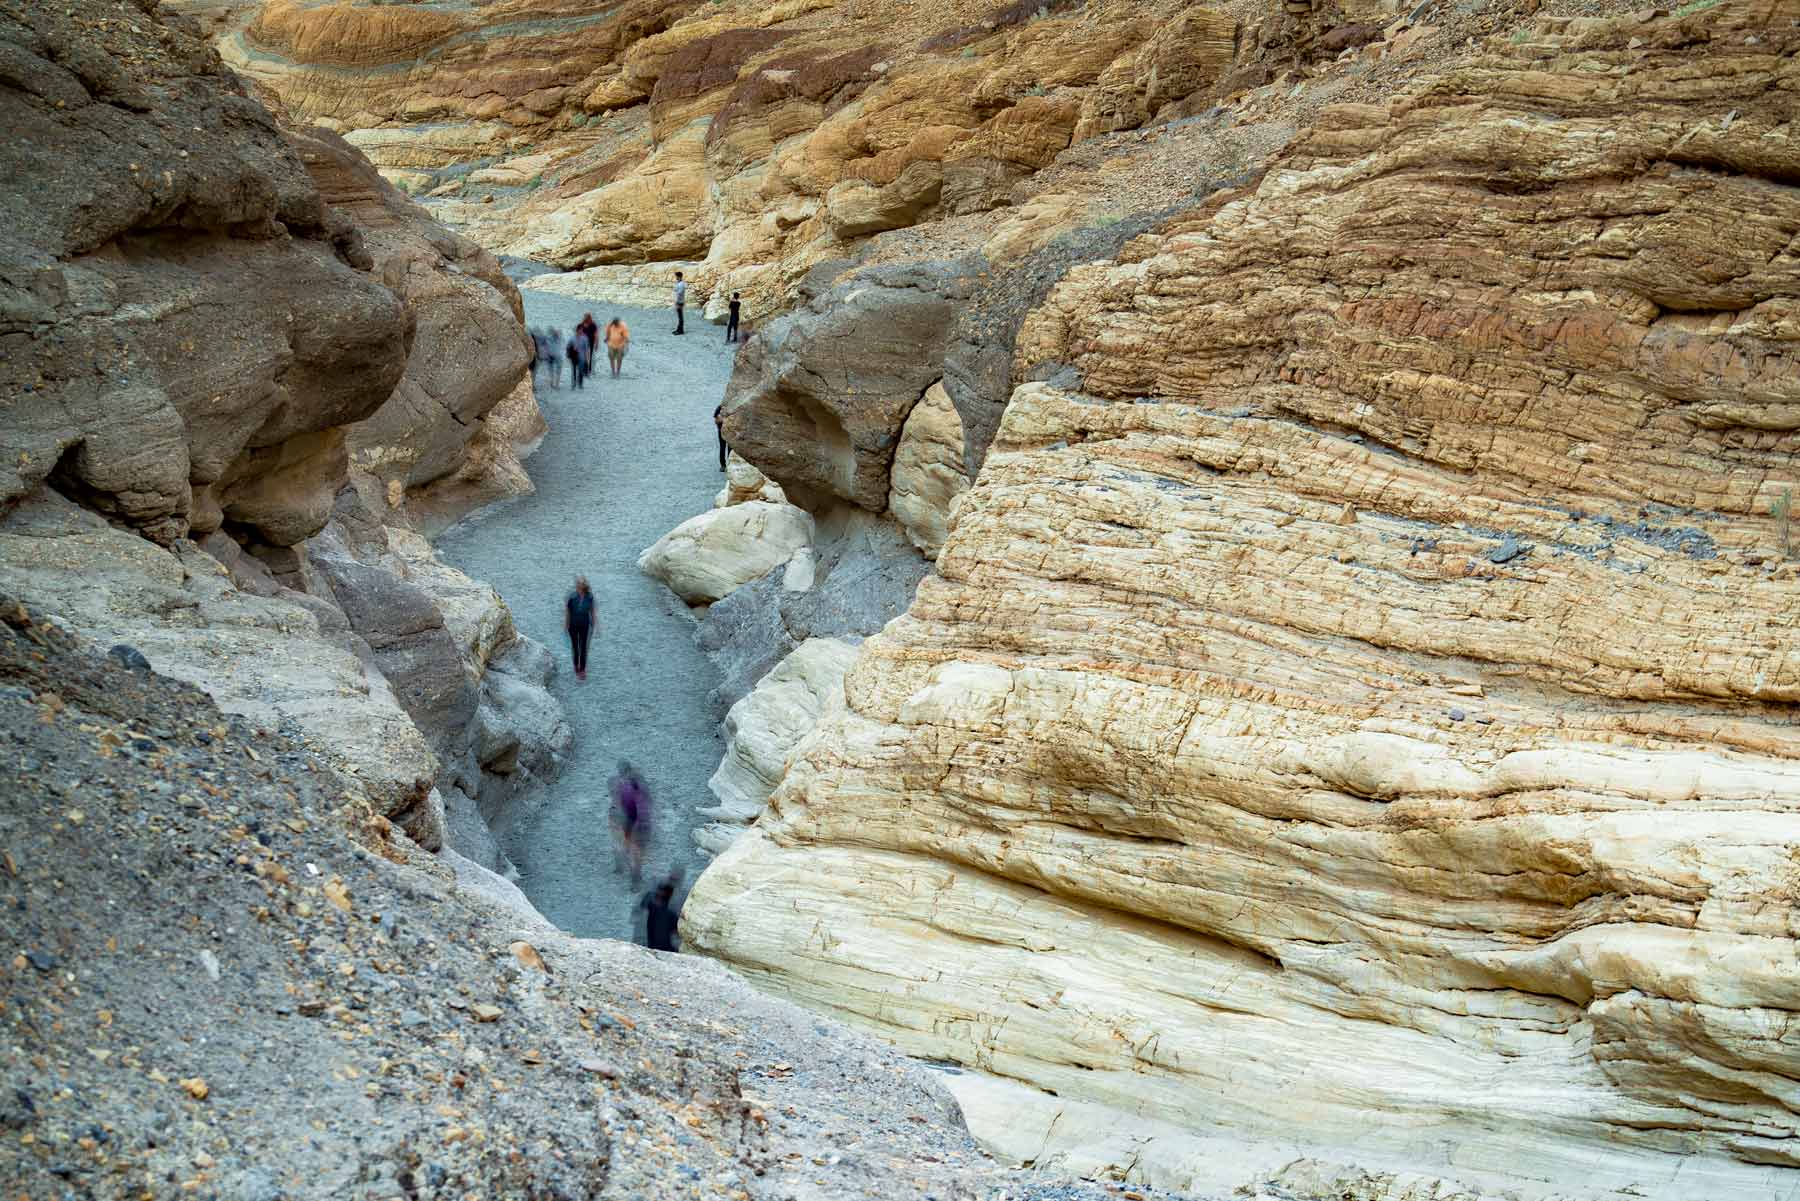 marble canyon death valley national park california